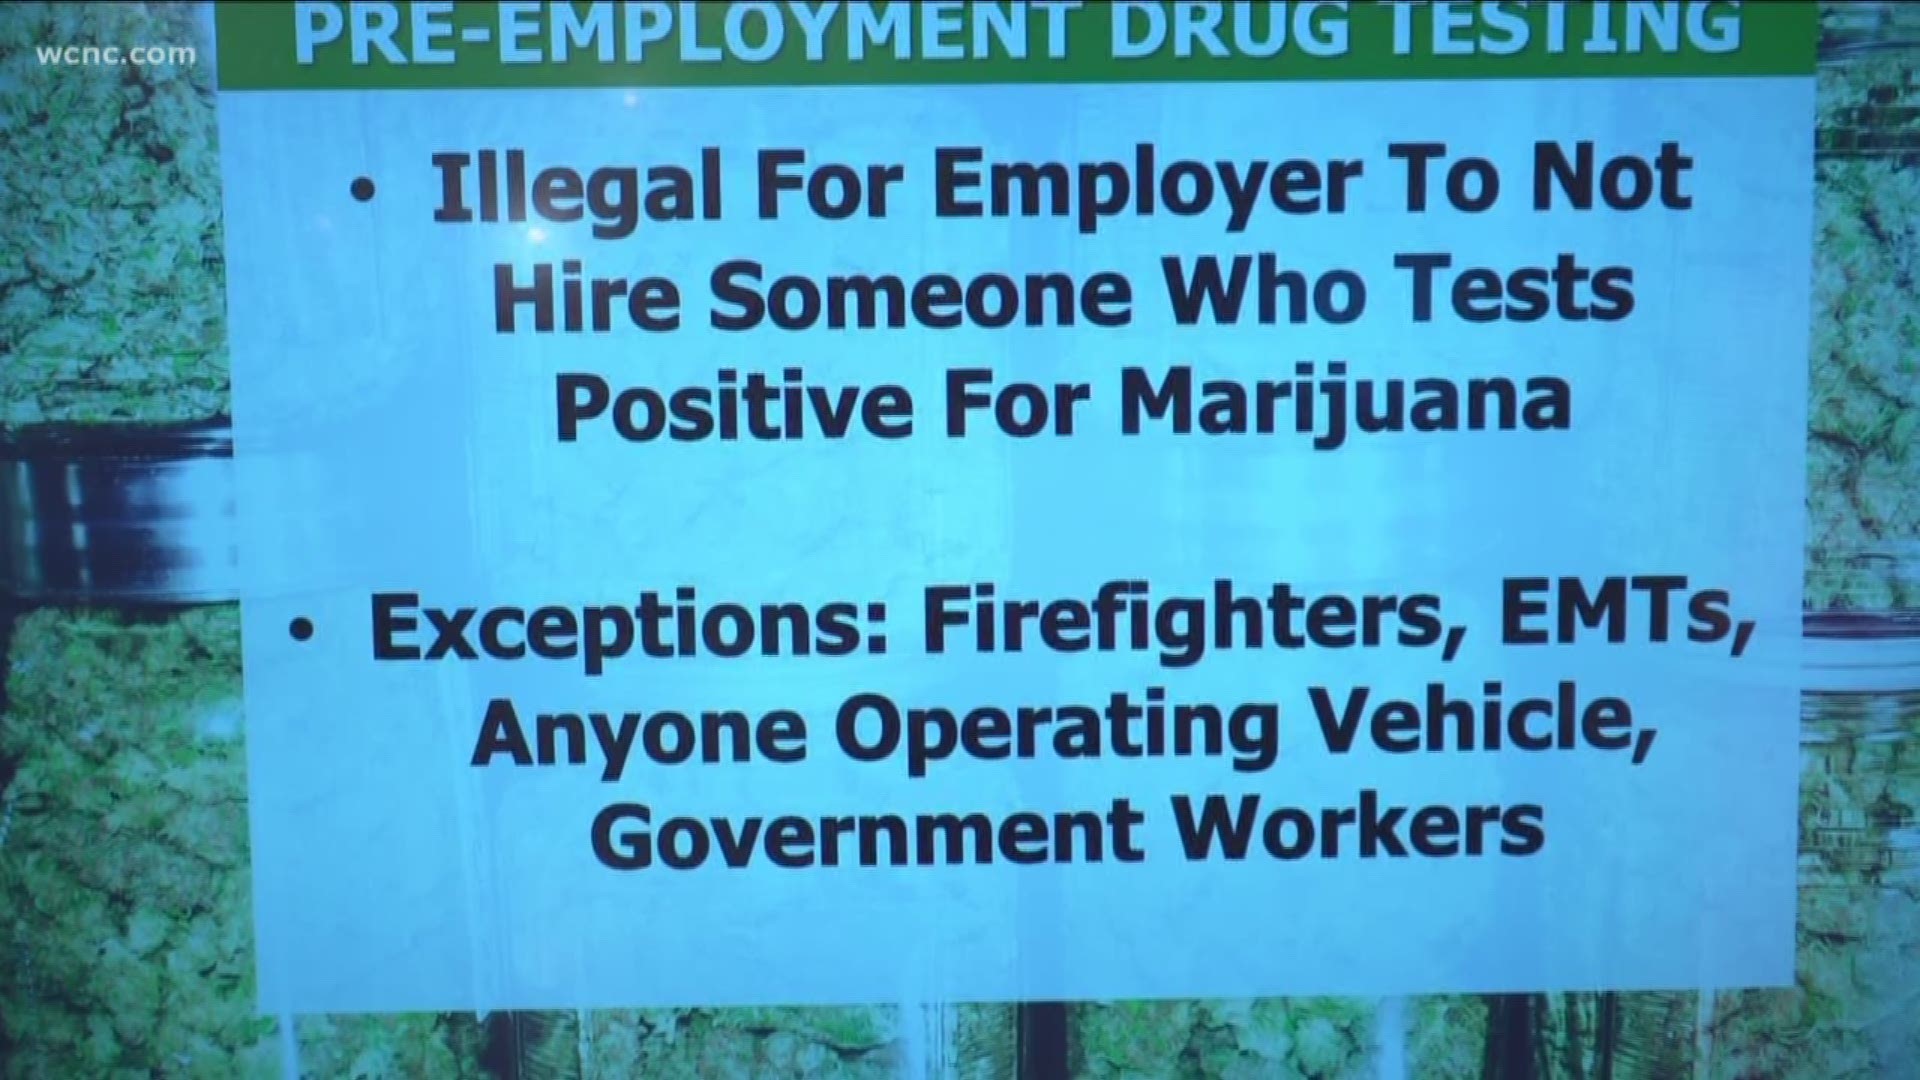 Nevada became the first state in the nation to make it illegal for employers to refuse to hire someone who tests positive for marijuana. There are certain jobs which are exempt from the requirement.